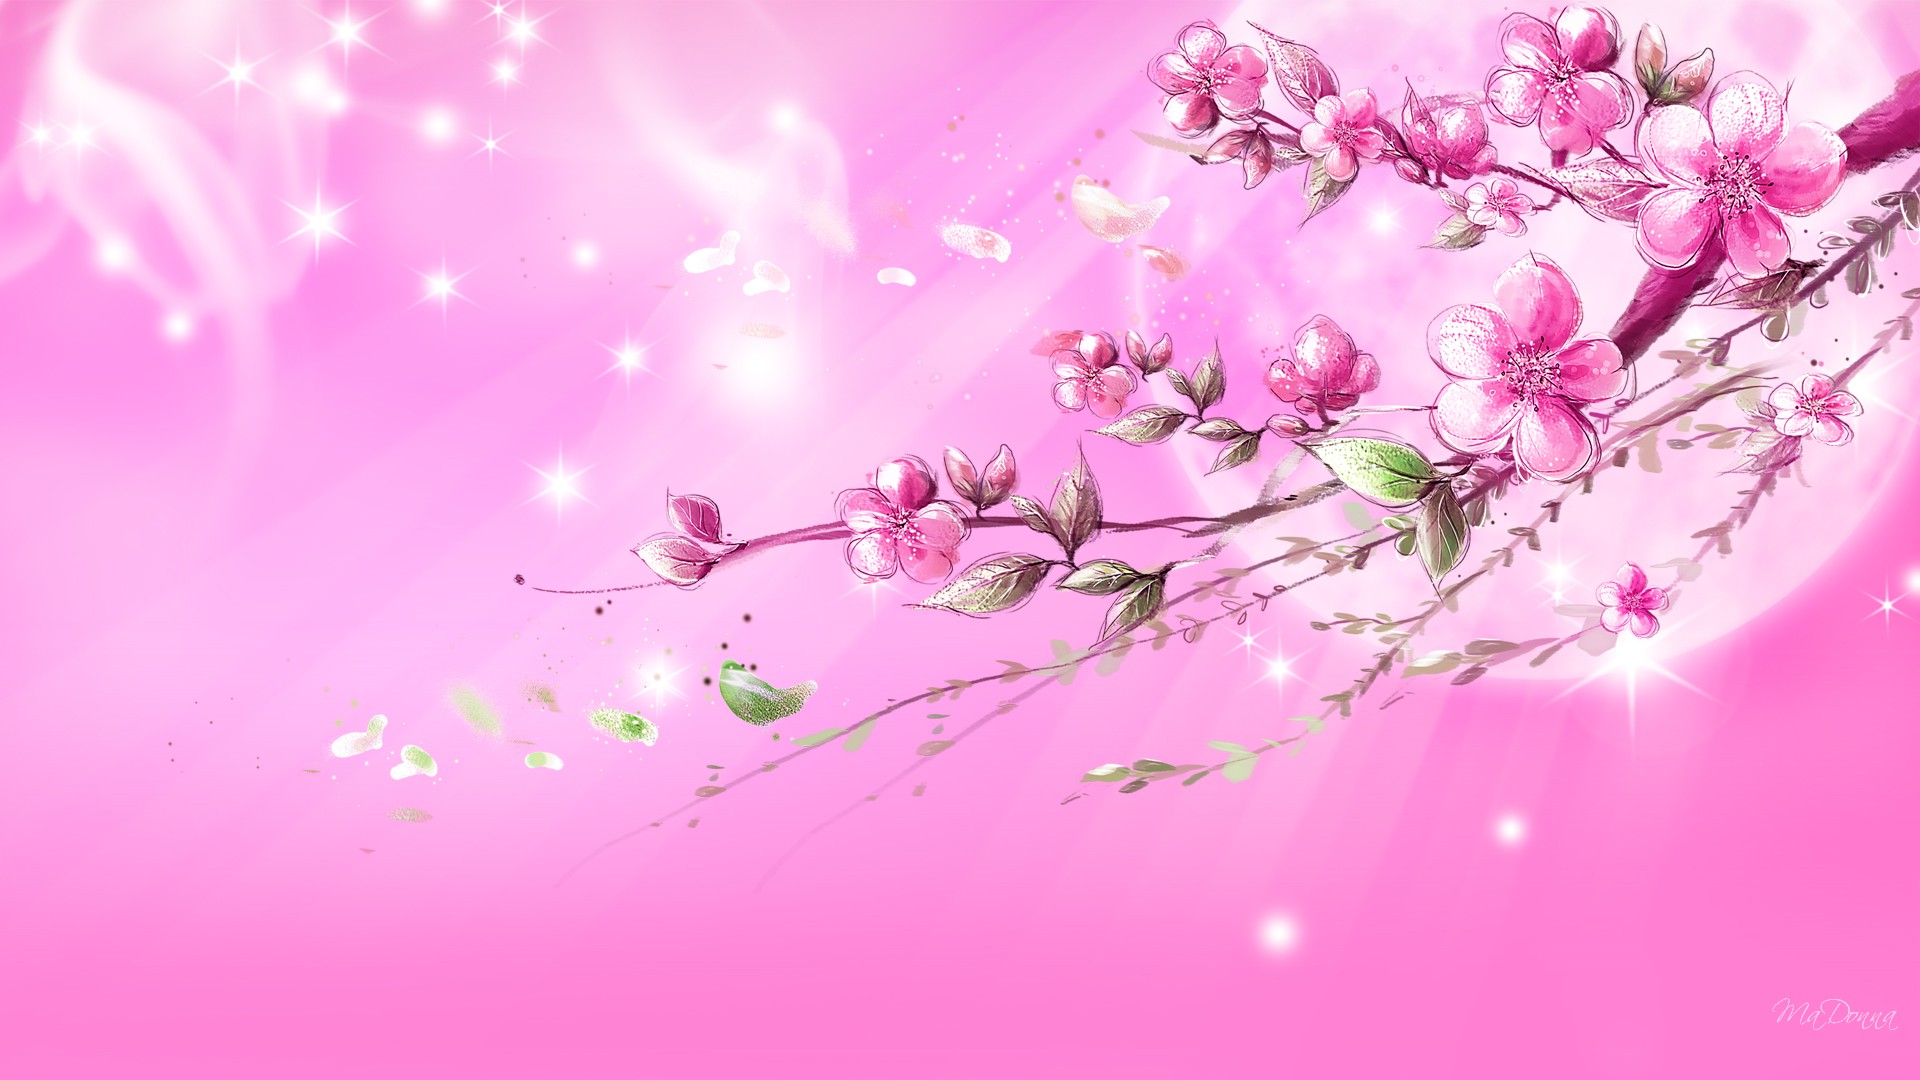 35 High Definition Pink WallpapersBackgrounds For 1920x1080